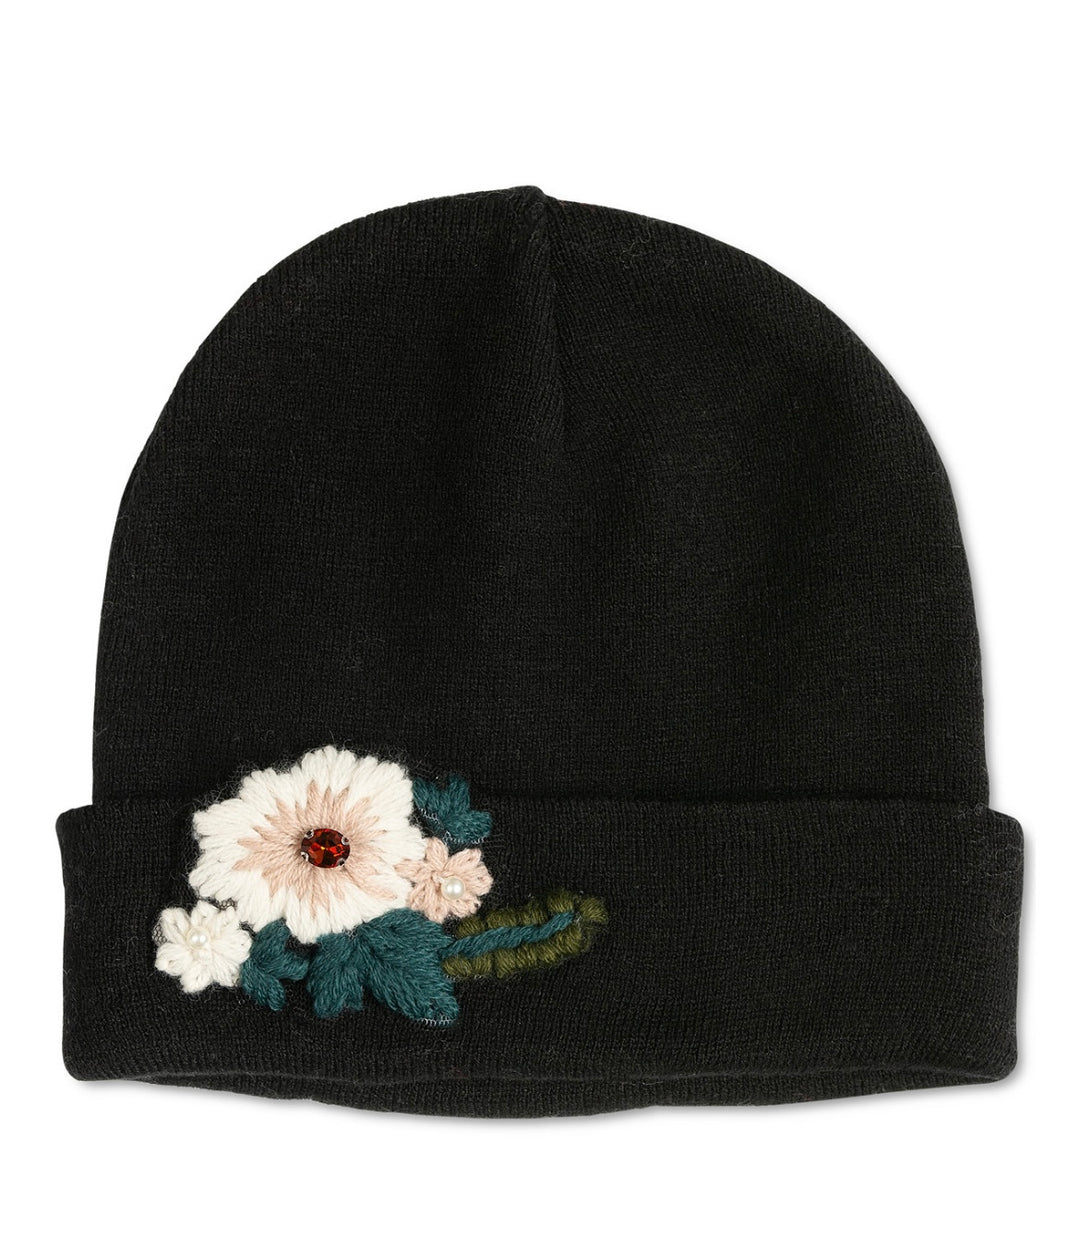 INC International Concepts Women's Floral Embroidered Beanie